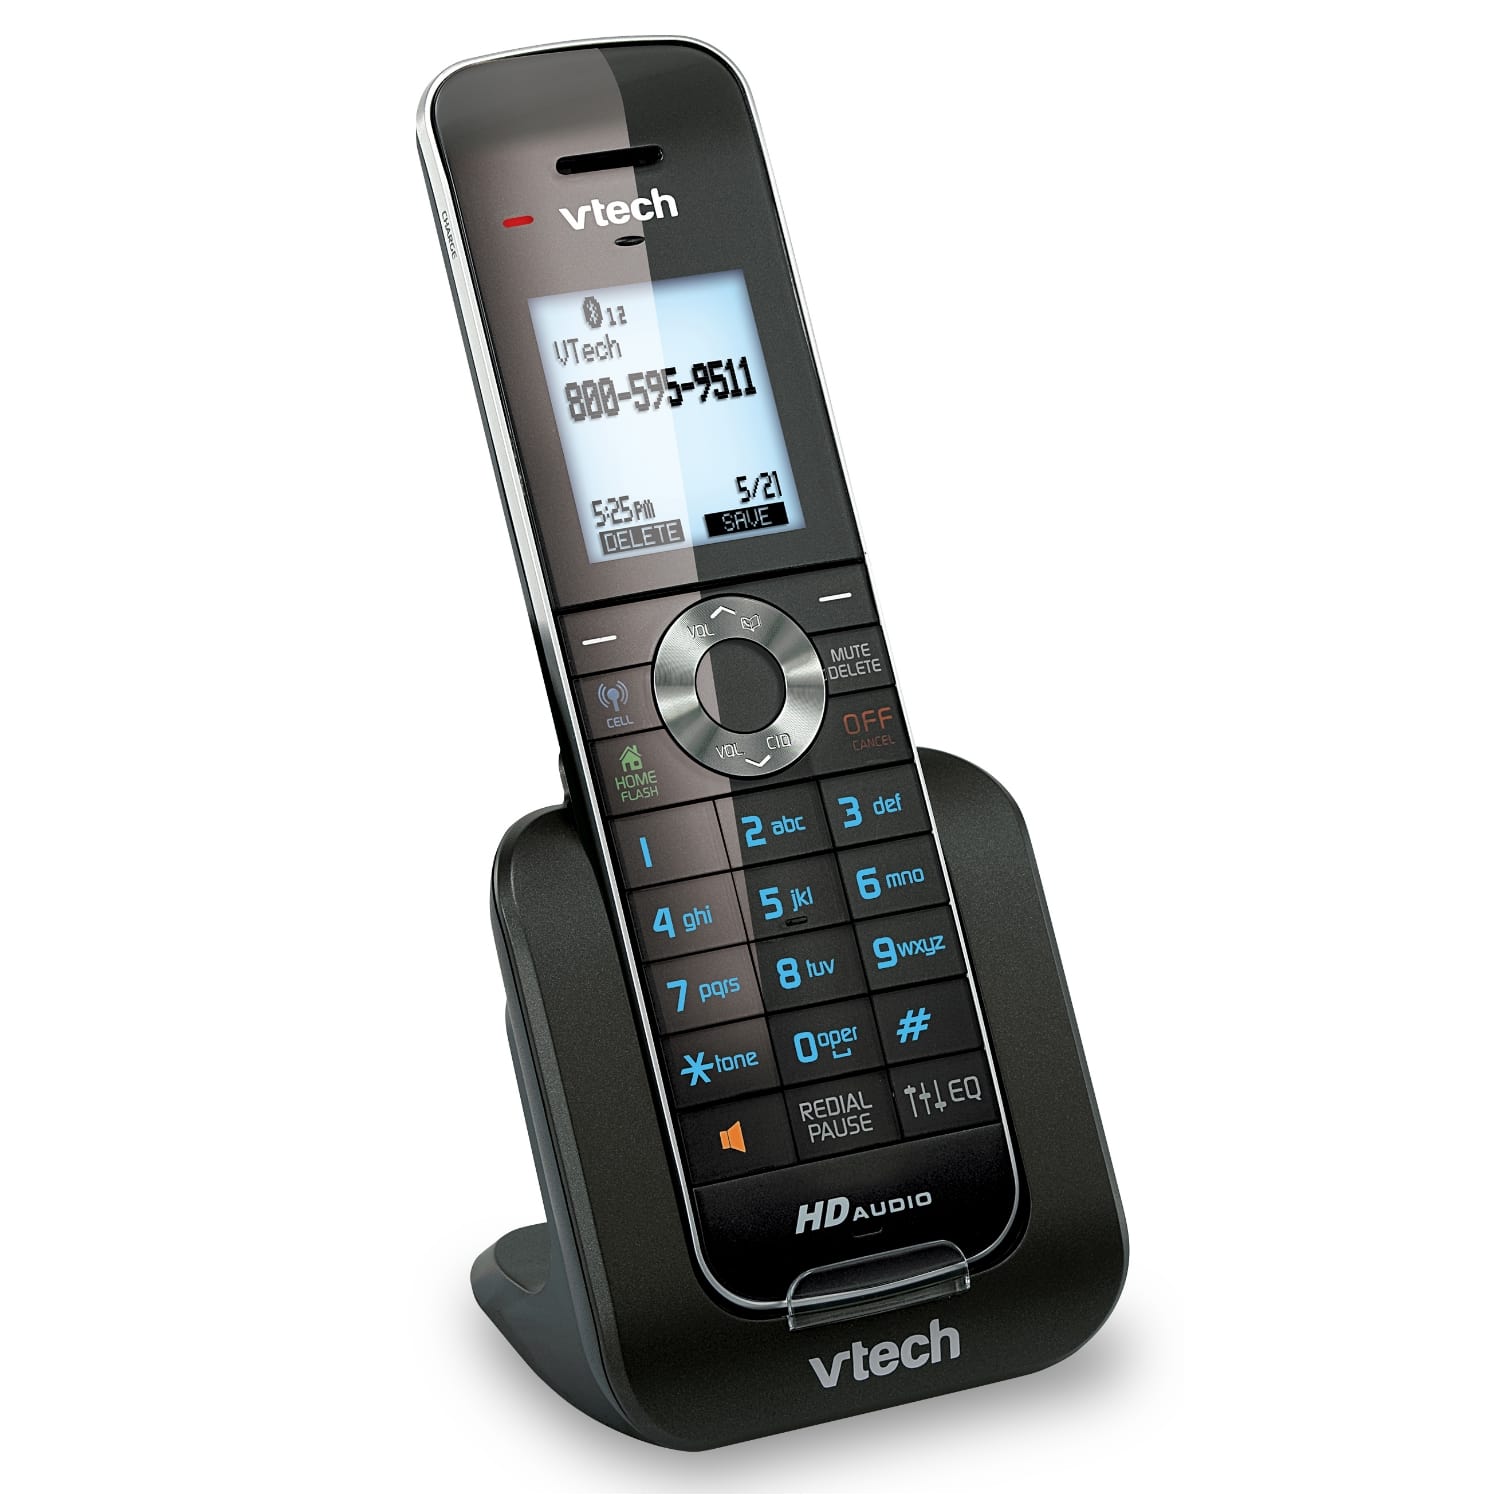 7 Handset Connect to Cell™ Phone System with Cordless Headset